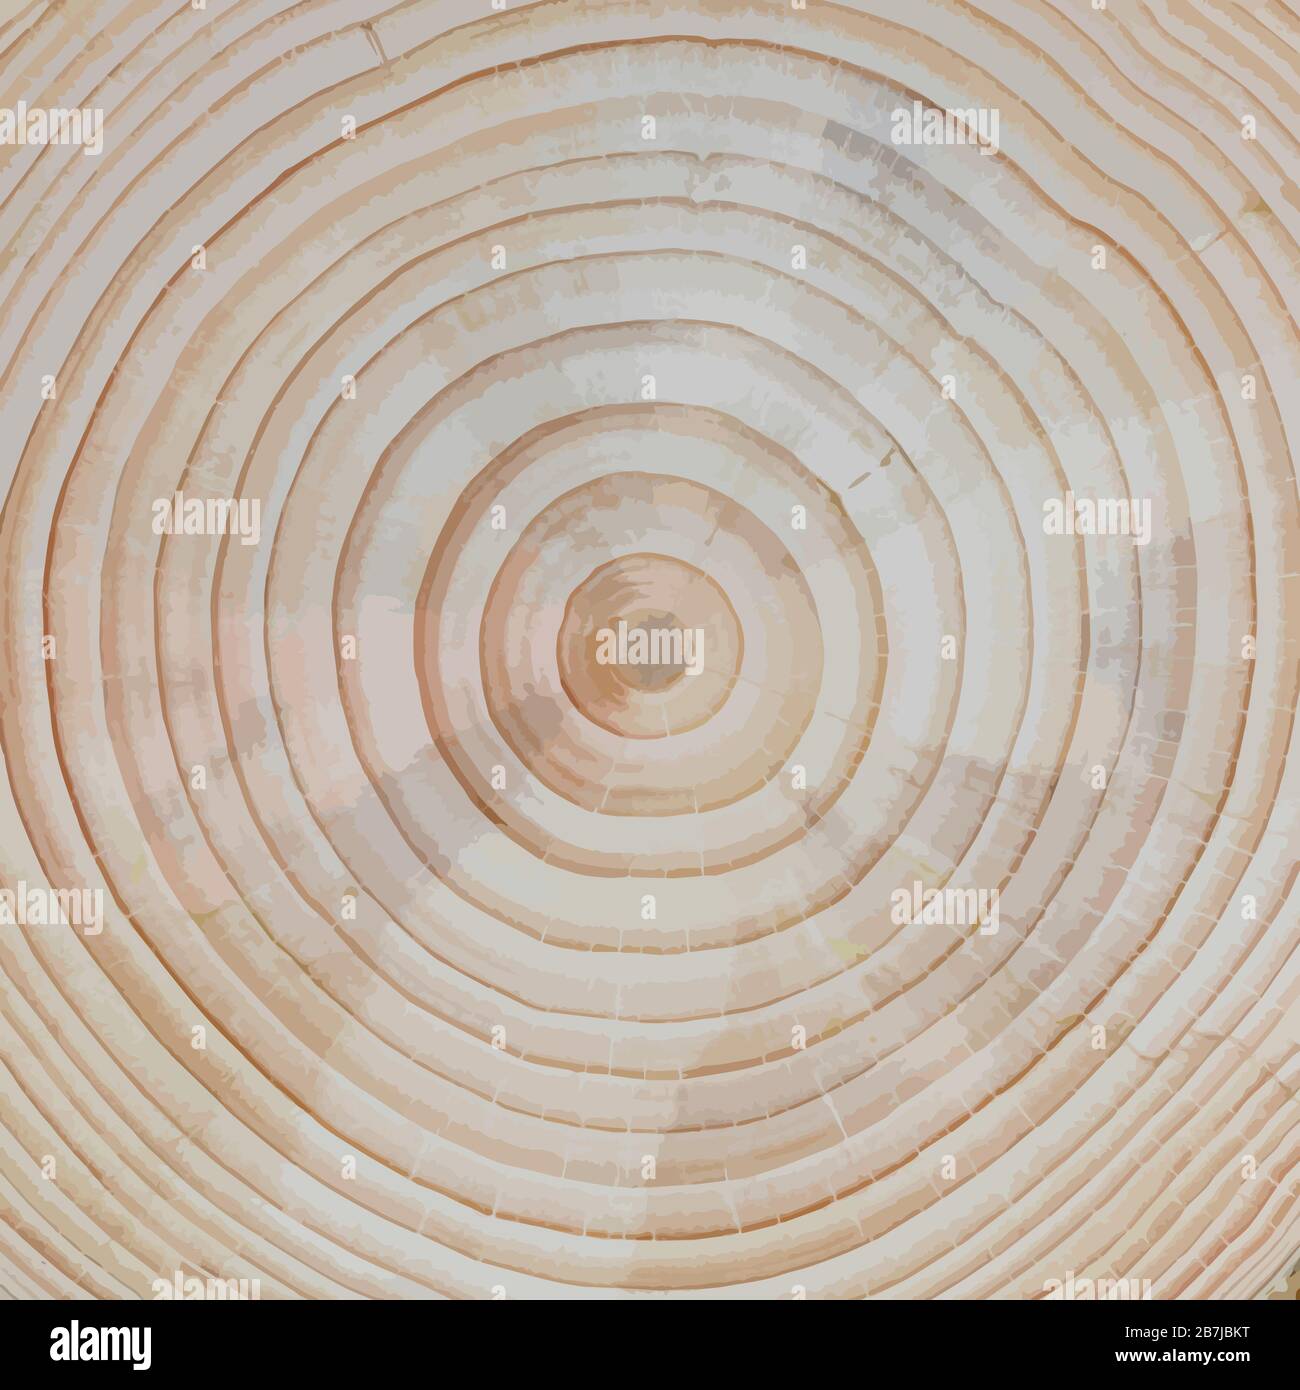 Wood Texture: Pine Tree Cross-Section: cross-section closeup of a pine tree trunk with differentiated growth rings Stock Photo